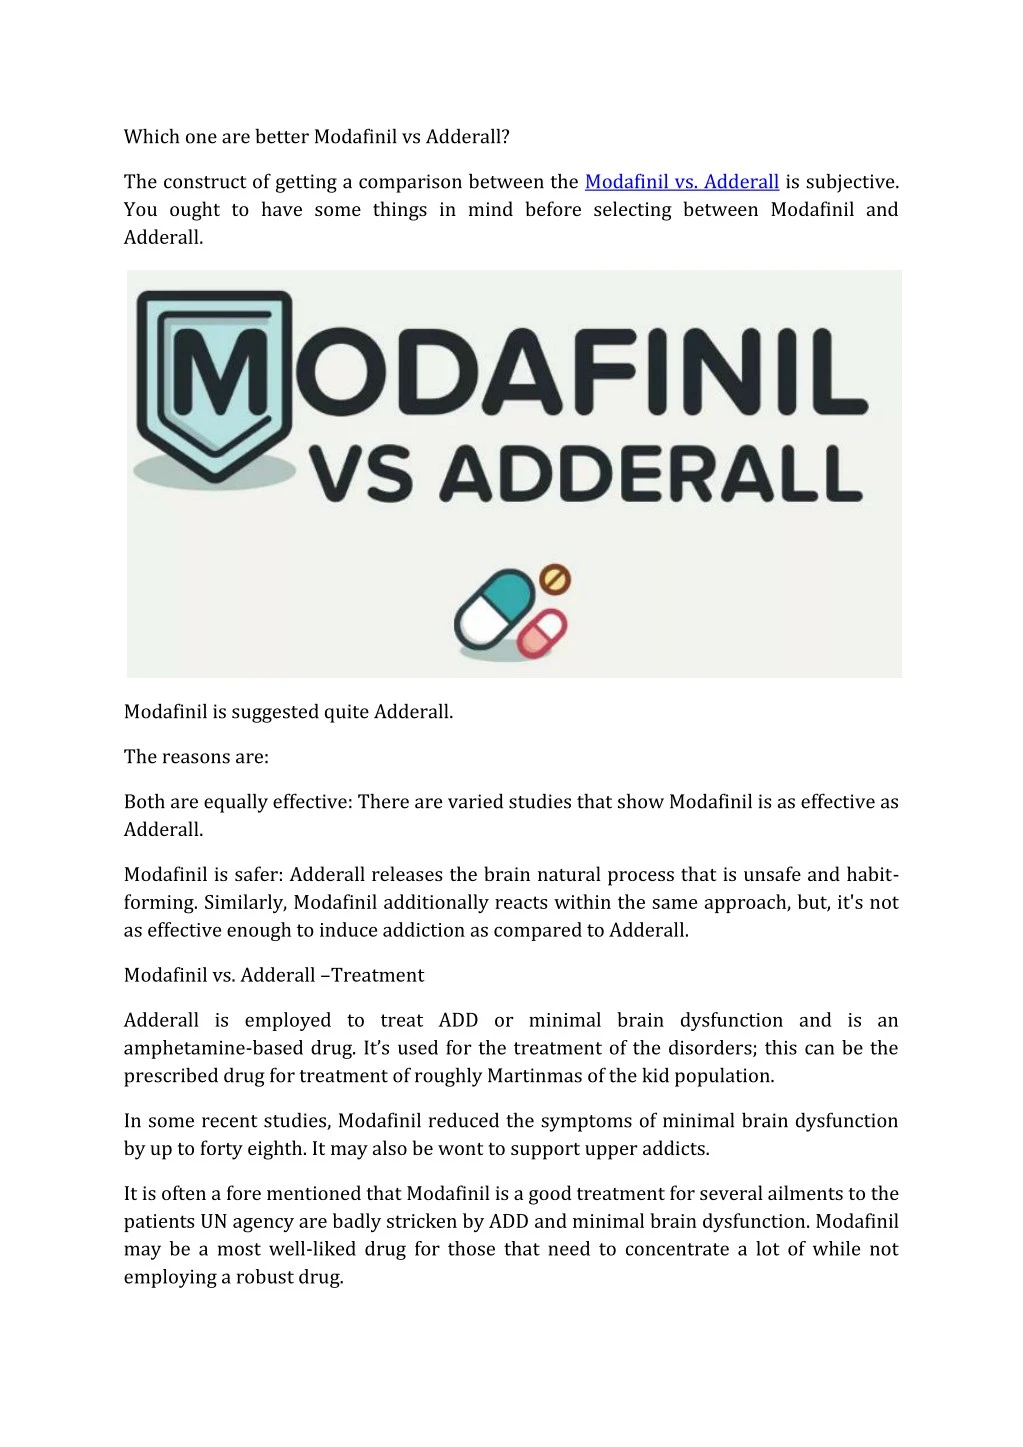 which one are better modafinil vs adderall